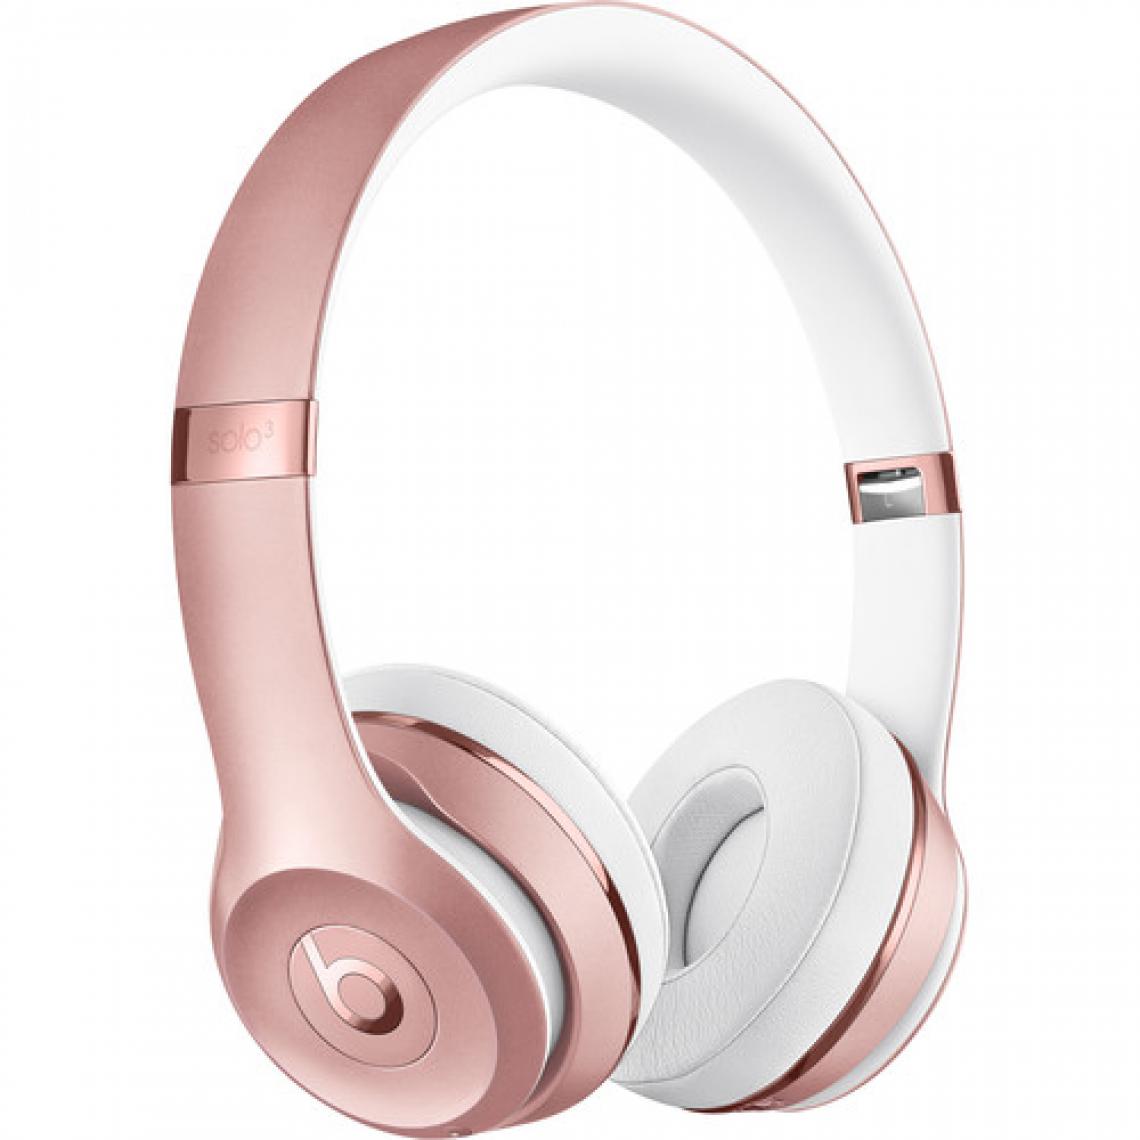 Beats - Beats Solo3 Wireless - Or rose - Casque